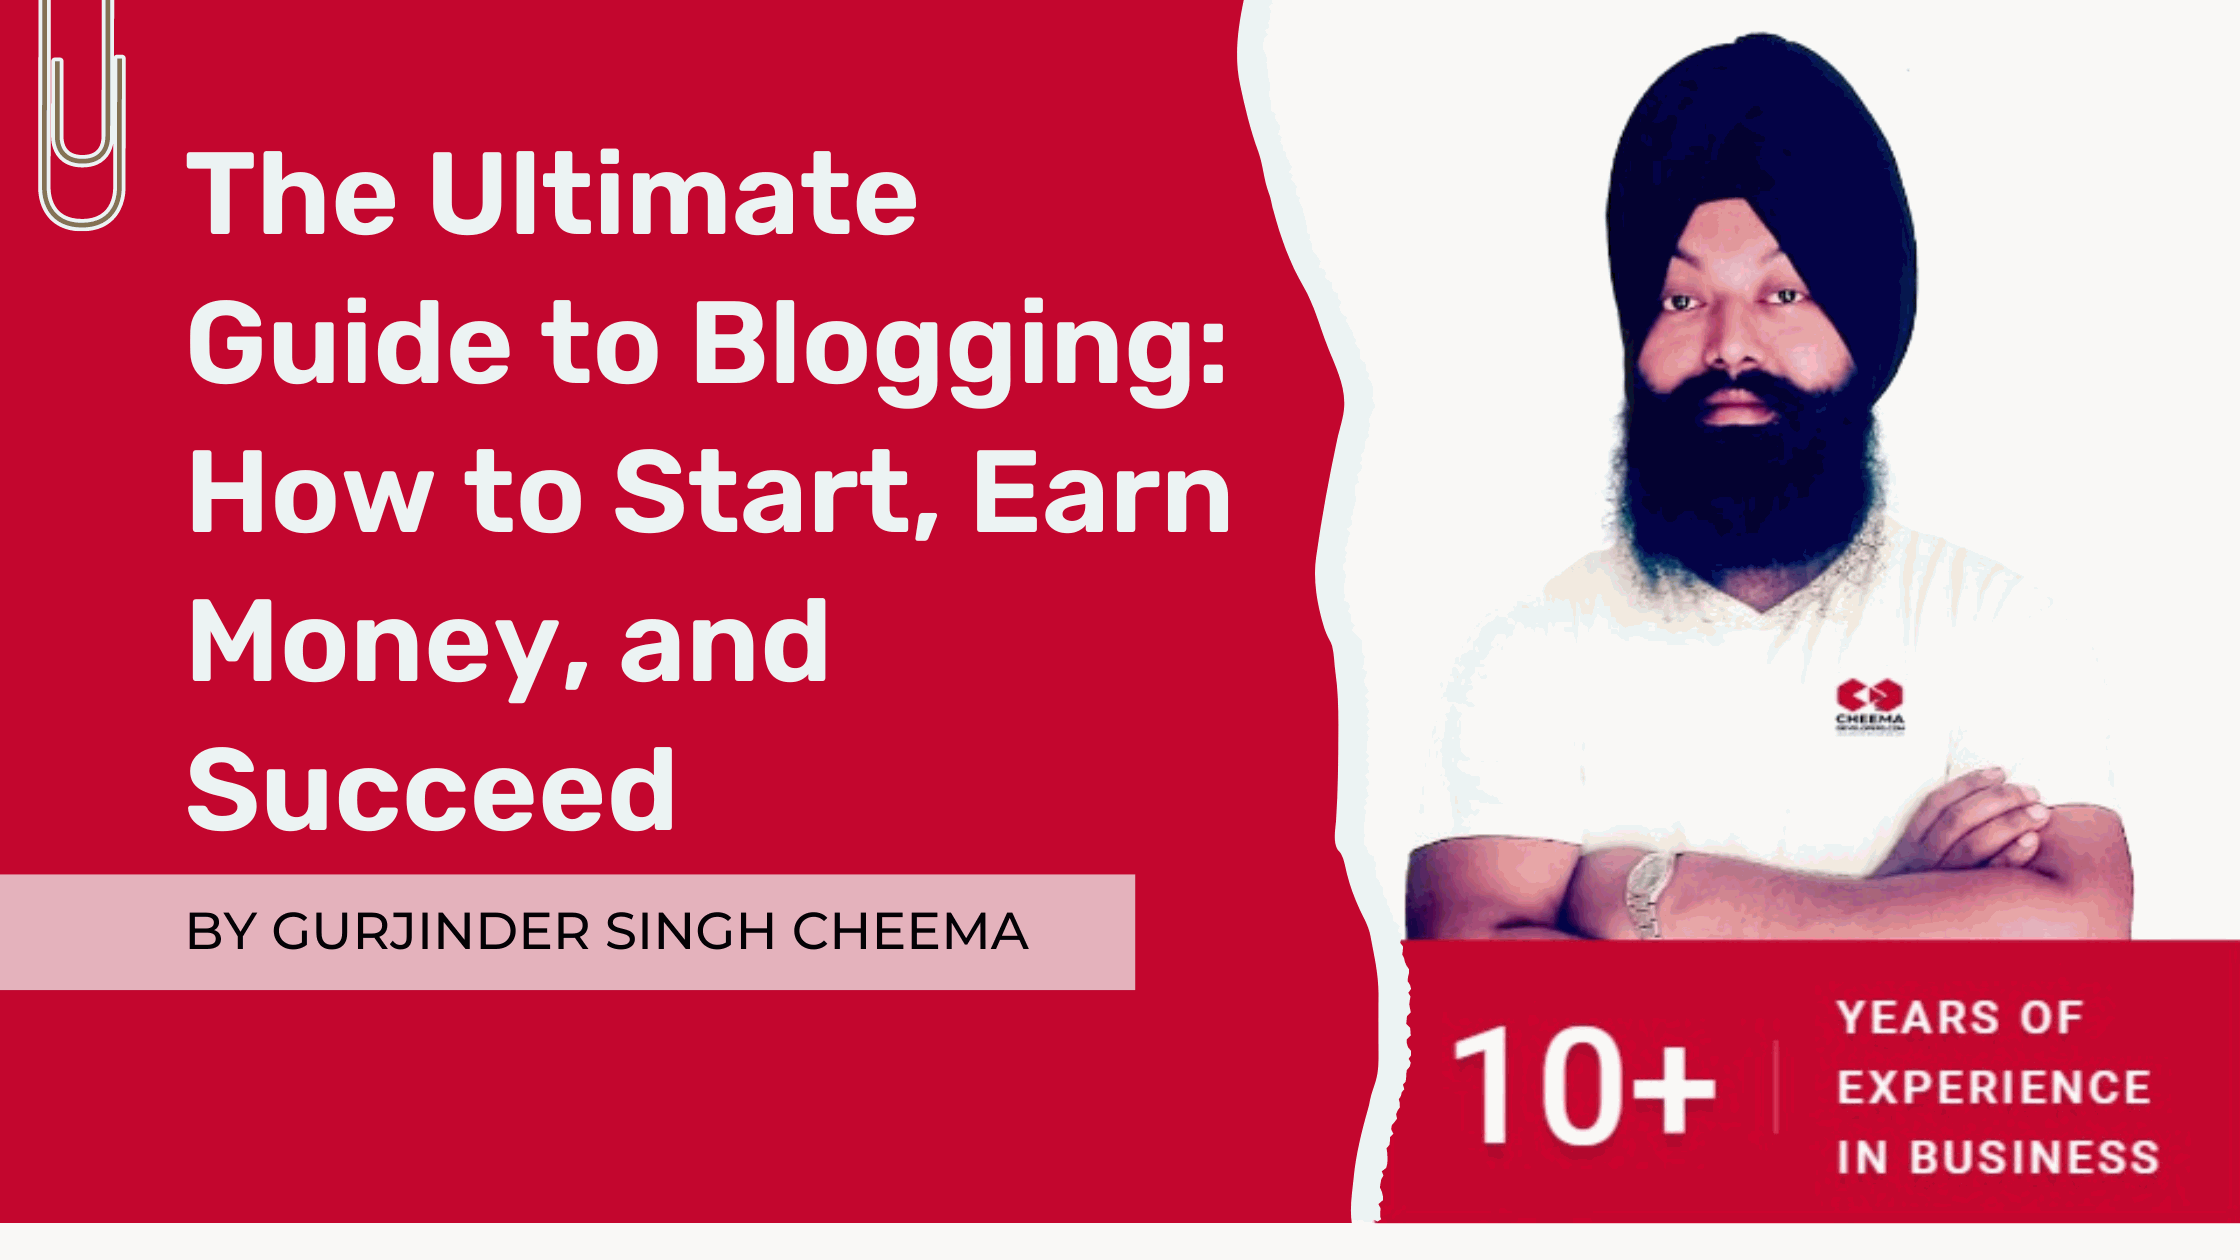 The Ultimate Guide to Blogging: How to Start, Earn Money, and Succeed